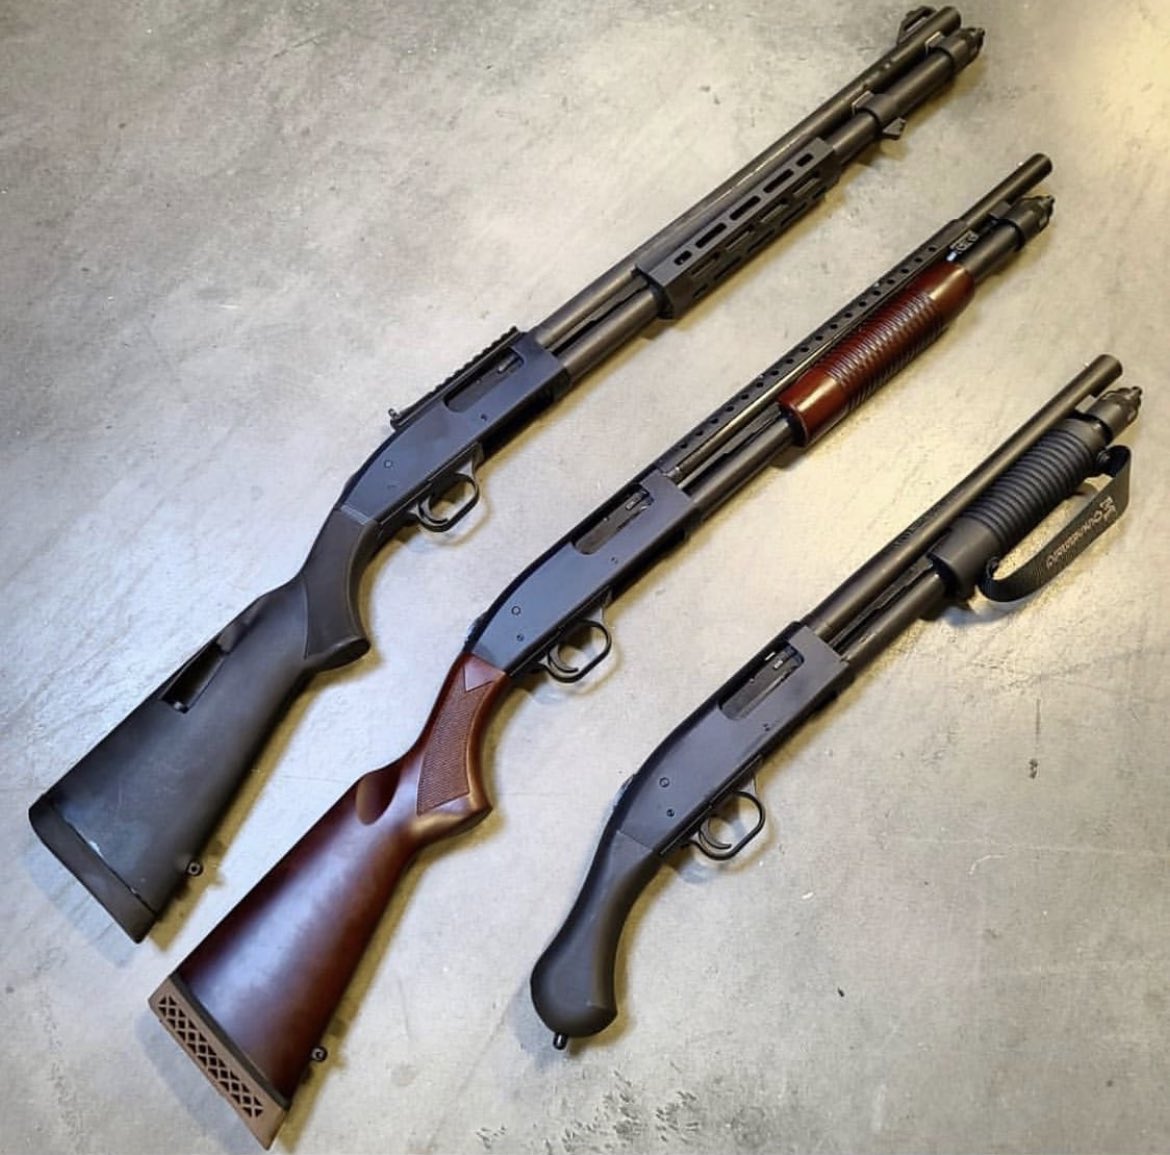 Trifecta! 

Trifecta! Which on are you grabbing? Top, middle or bottom? #Mossberg #Mossberg590 #MossbergShockwave #HomeDefense